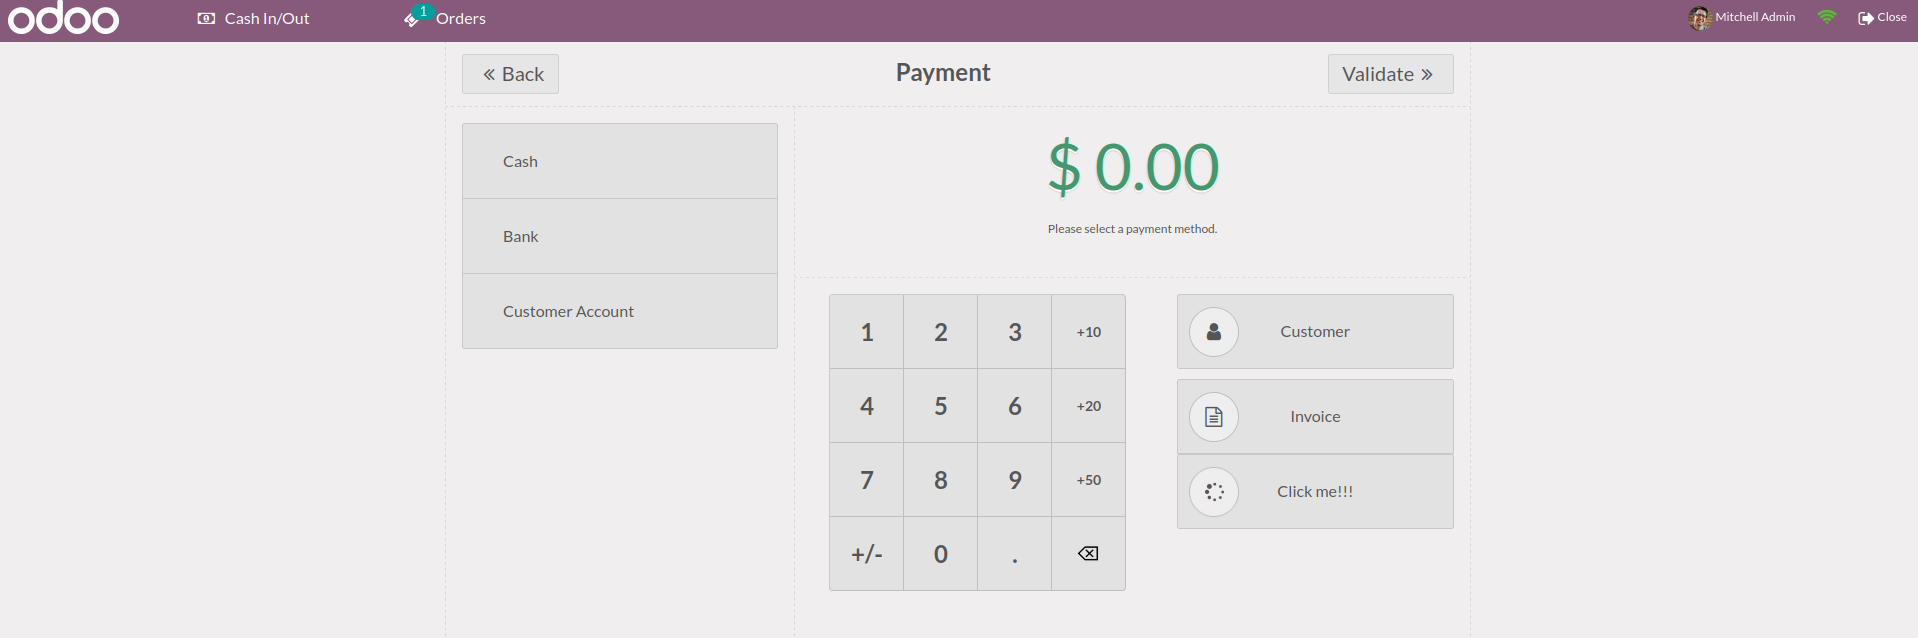 how-to-add-buttons-in-odoo-15-pos-using-owl-cybrosys